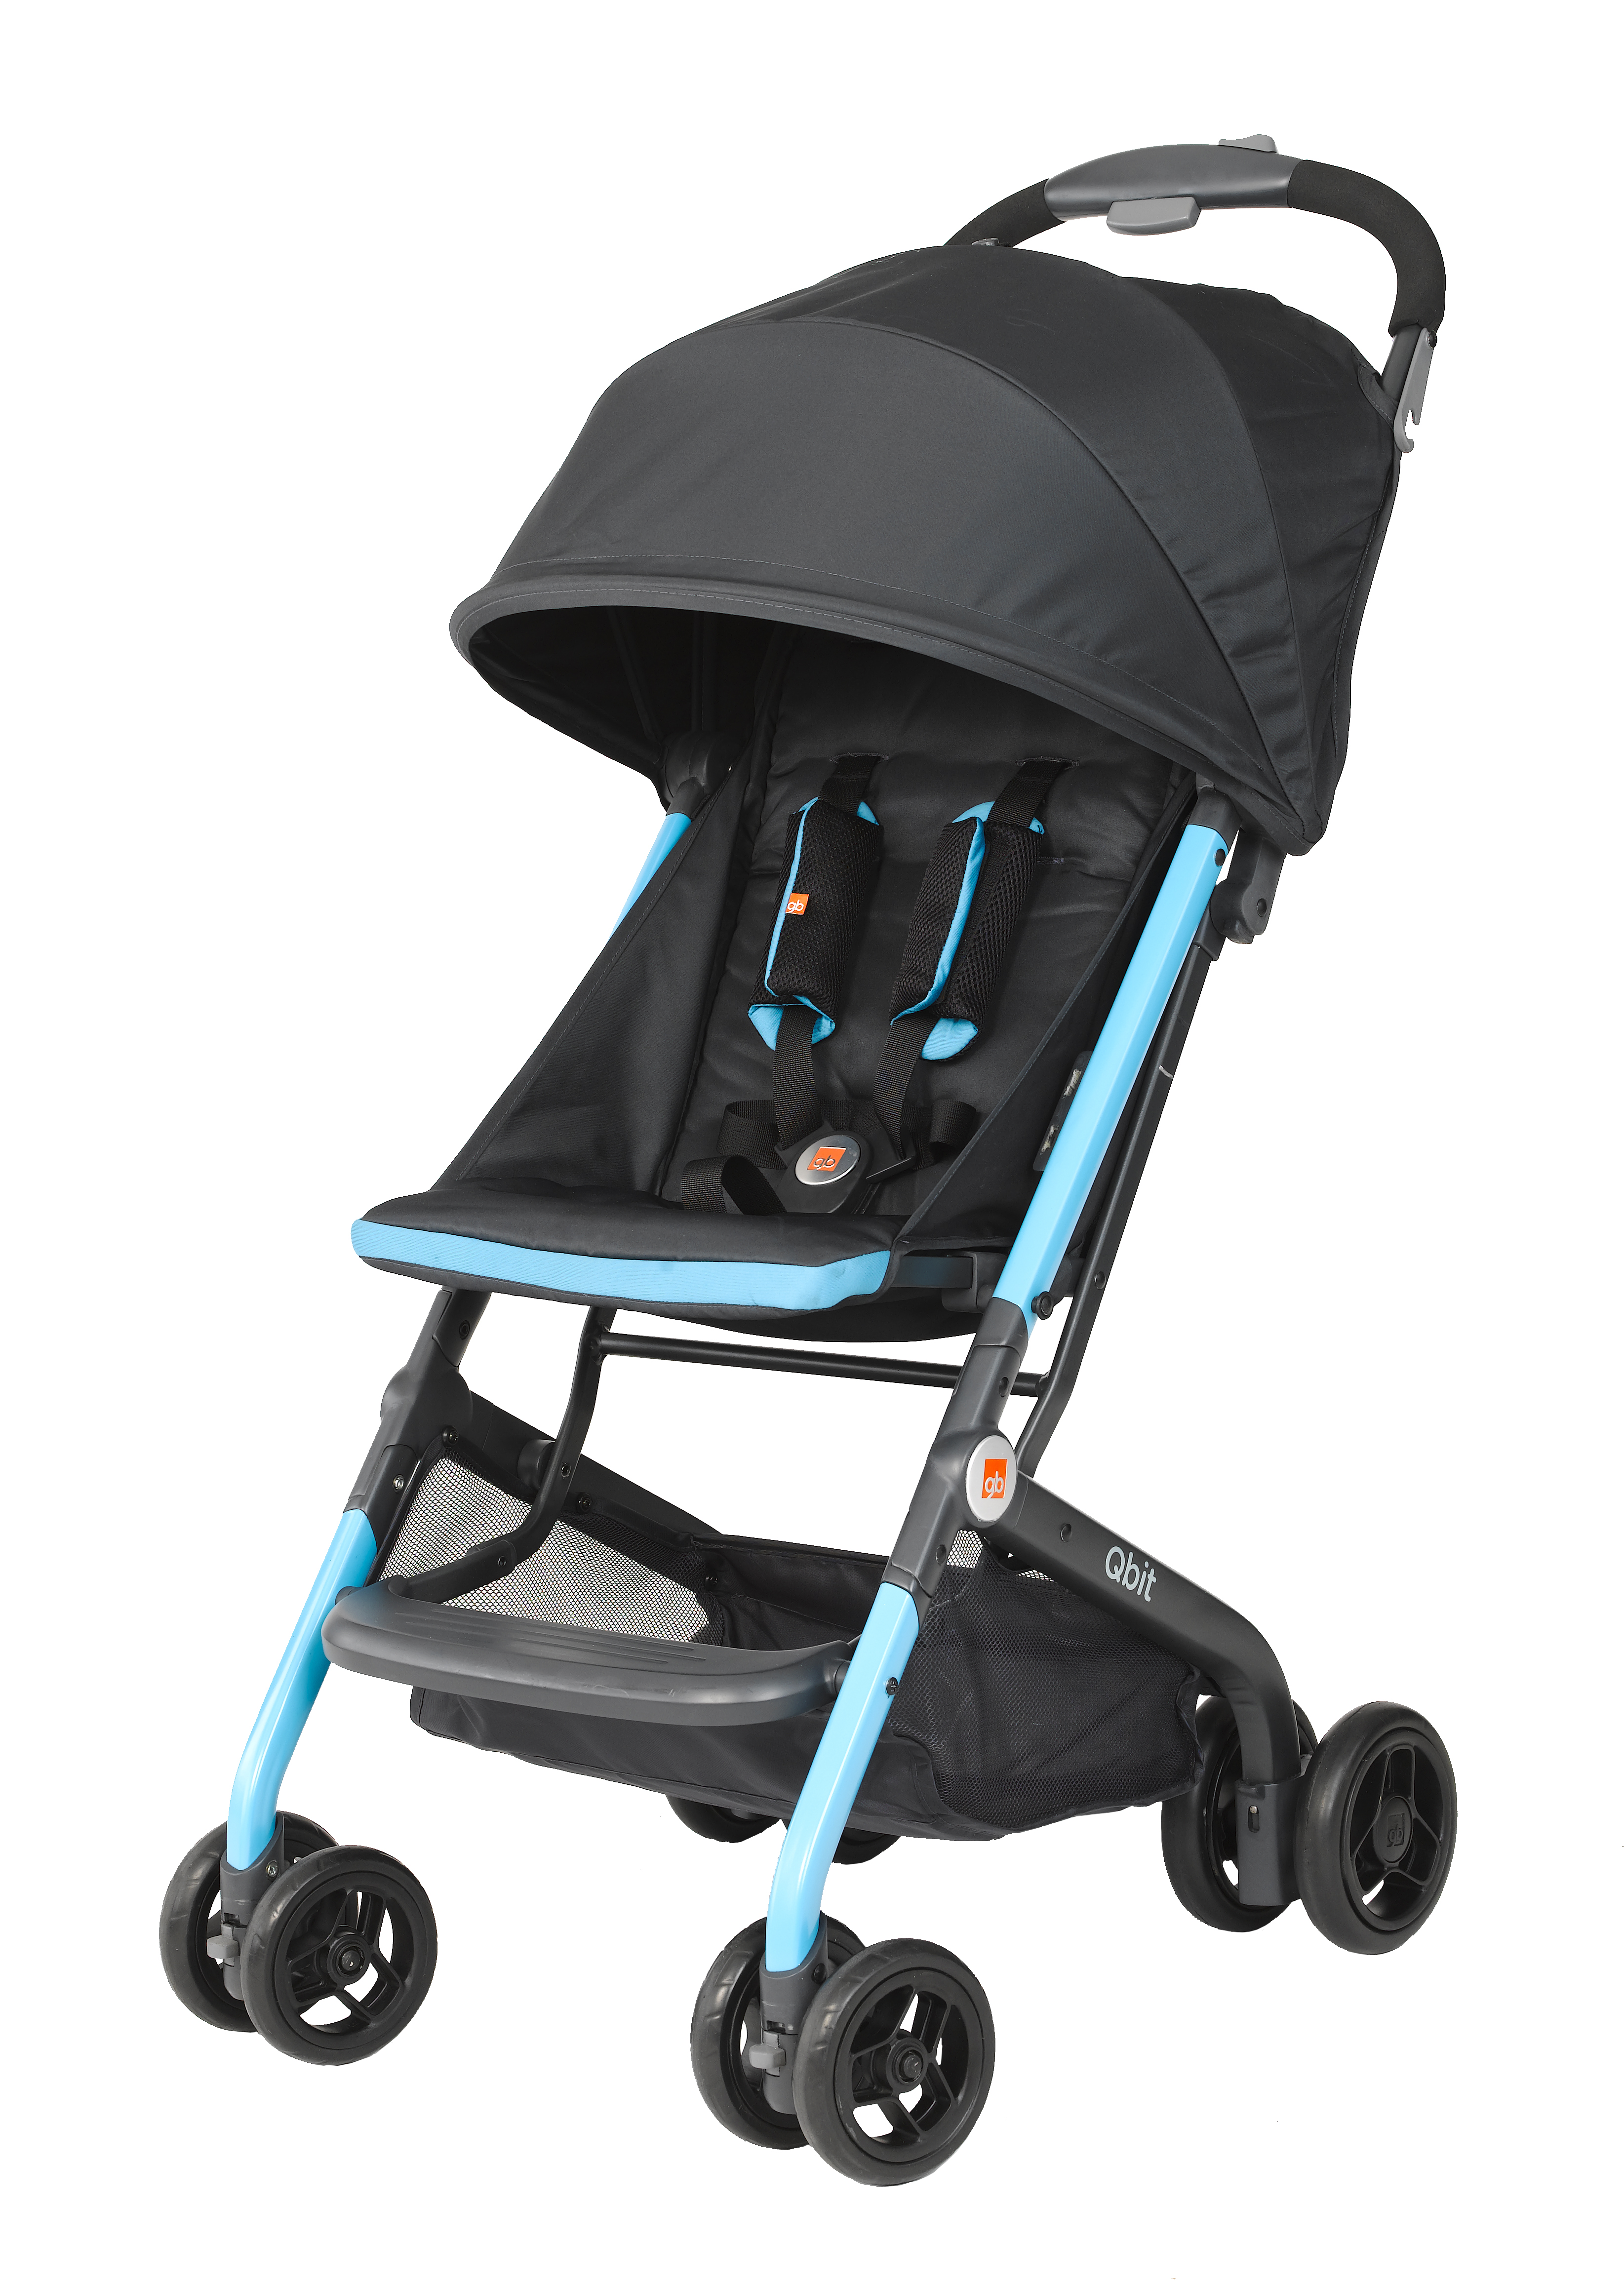 Aria Child Recalls Strollers Due to 